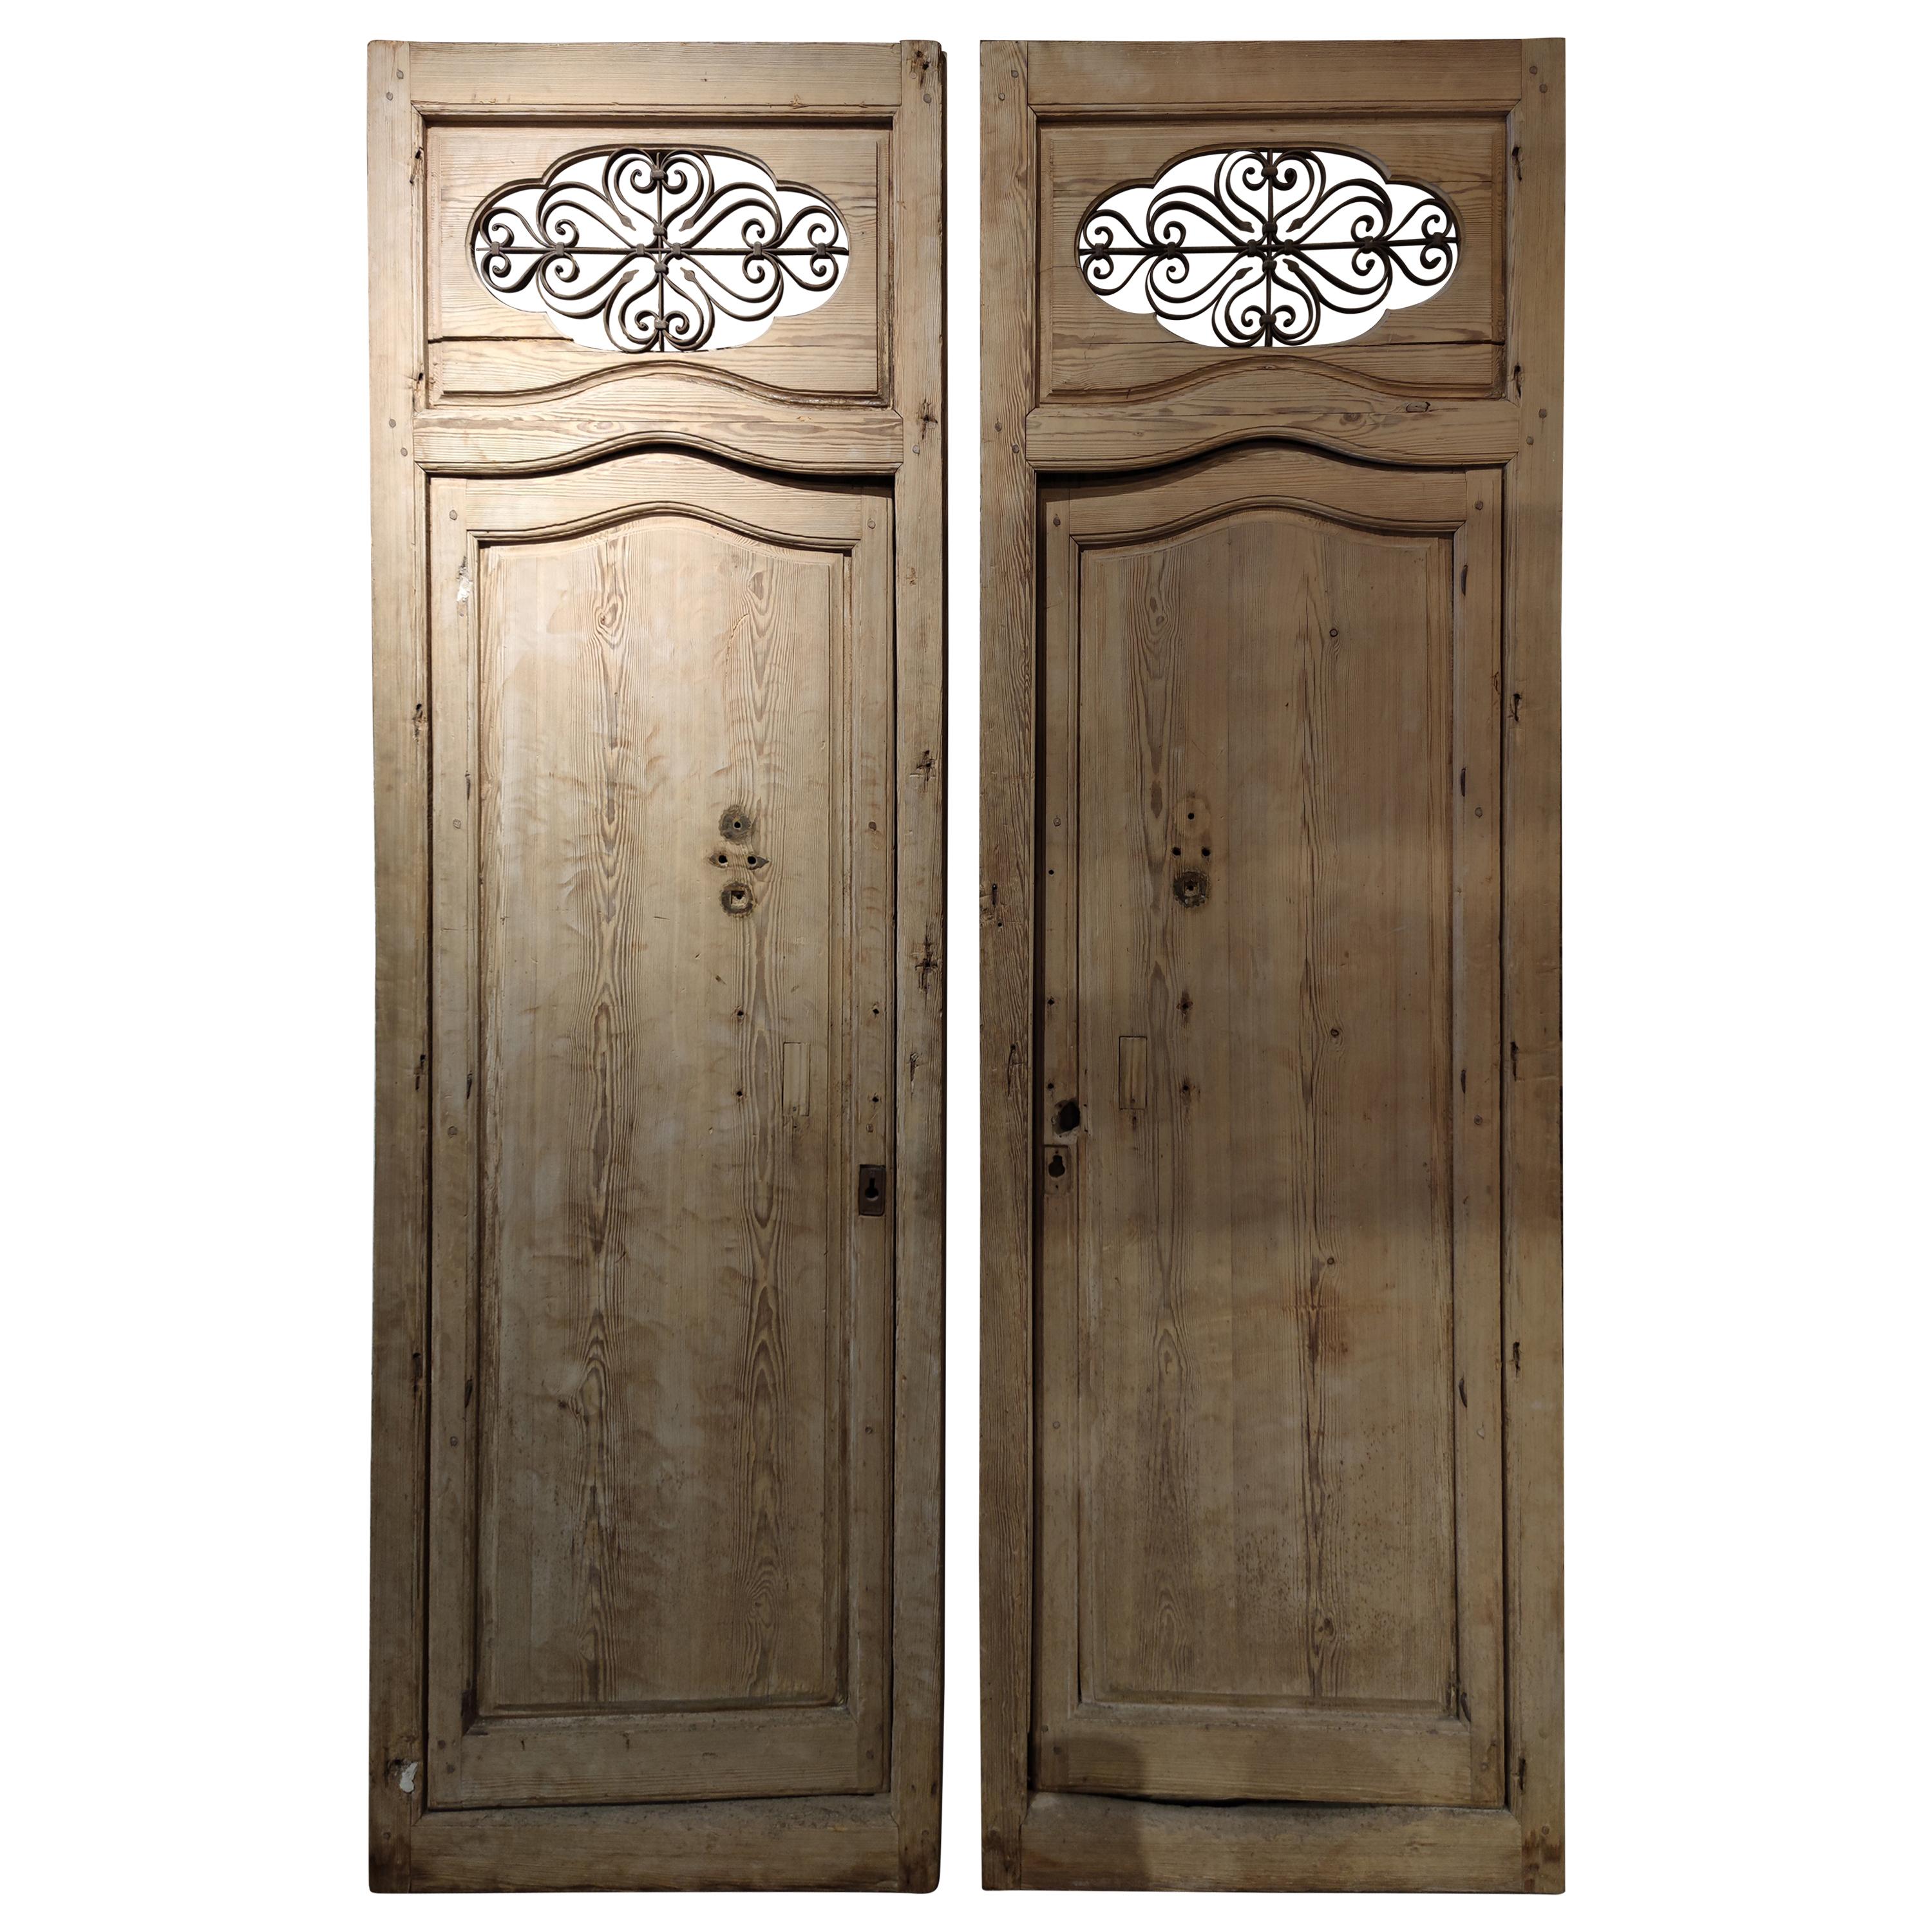 19th Century Spanish Andalusian Double Door with Wrought Iron Decorative Grille For Sale